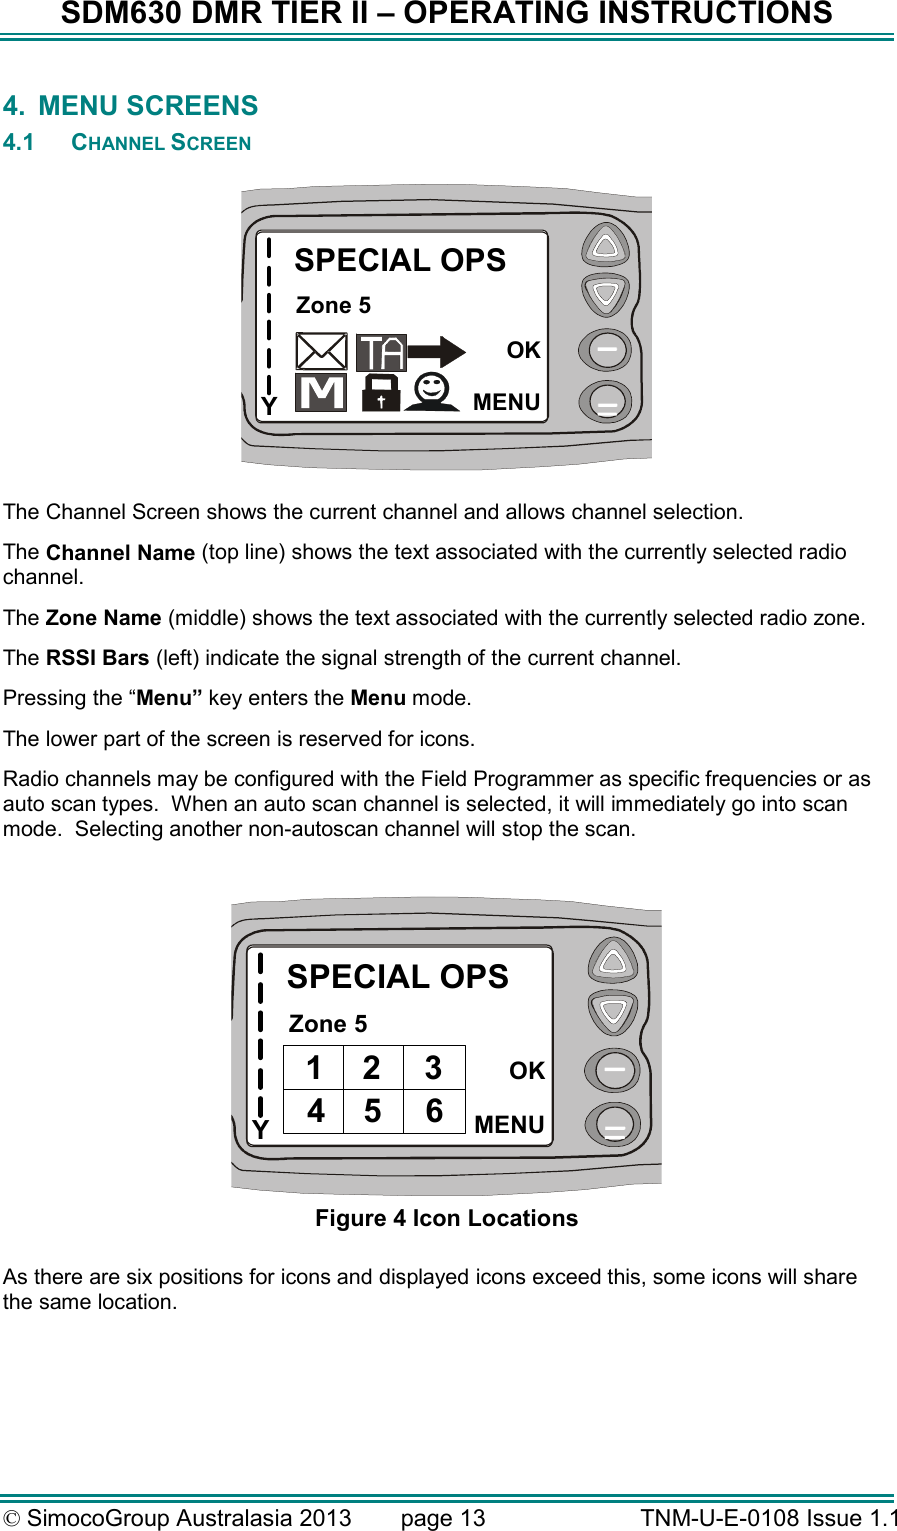 SDM630 DMR TIER II – OPERATING INSTRUCTIONS © SimocoGroup Australasia 2013   page 13   TNM-U-E-0108 Issue 1.1 4.  MENU SCREENS 4.1  CHANNEL SCREEN  YSPECIAL OPSZone 5OKMENU  The Channel Screen shows the current channel and allows channel selection.   The Channel Name (top line) shows the text associated with the currently selected radio channel. The Zone Name (middle) shows the text associated with the currently selected radio zone. The RSSI Bars (left) indicate the signal strength of the current channel. Pressing the “Menu” key enters the Menu mode. The lower part of the screen is reserved for icons. Radio channels may be configured with the Field Programmer as specific frequencies or as auto scan types.  When an auto scan channel is selected, it will immediately go into scan mode.  Selecting another non-autoscan channel will stop the scan.  YSPECIAL OPSZone 5OKMENU1 2 3654 Figure 4 Icon Locations  As there are six positions for icons and displayed icons exceed this, some icons will share the same location.    